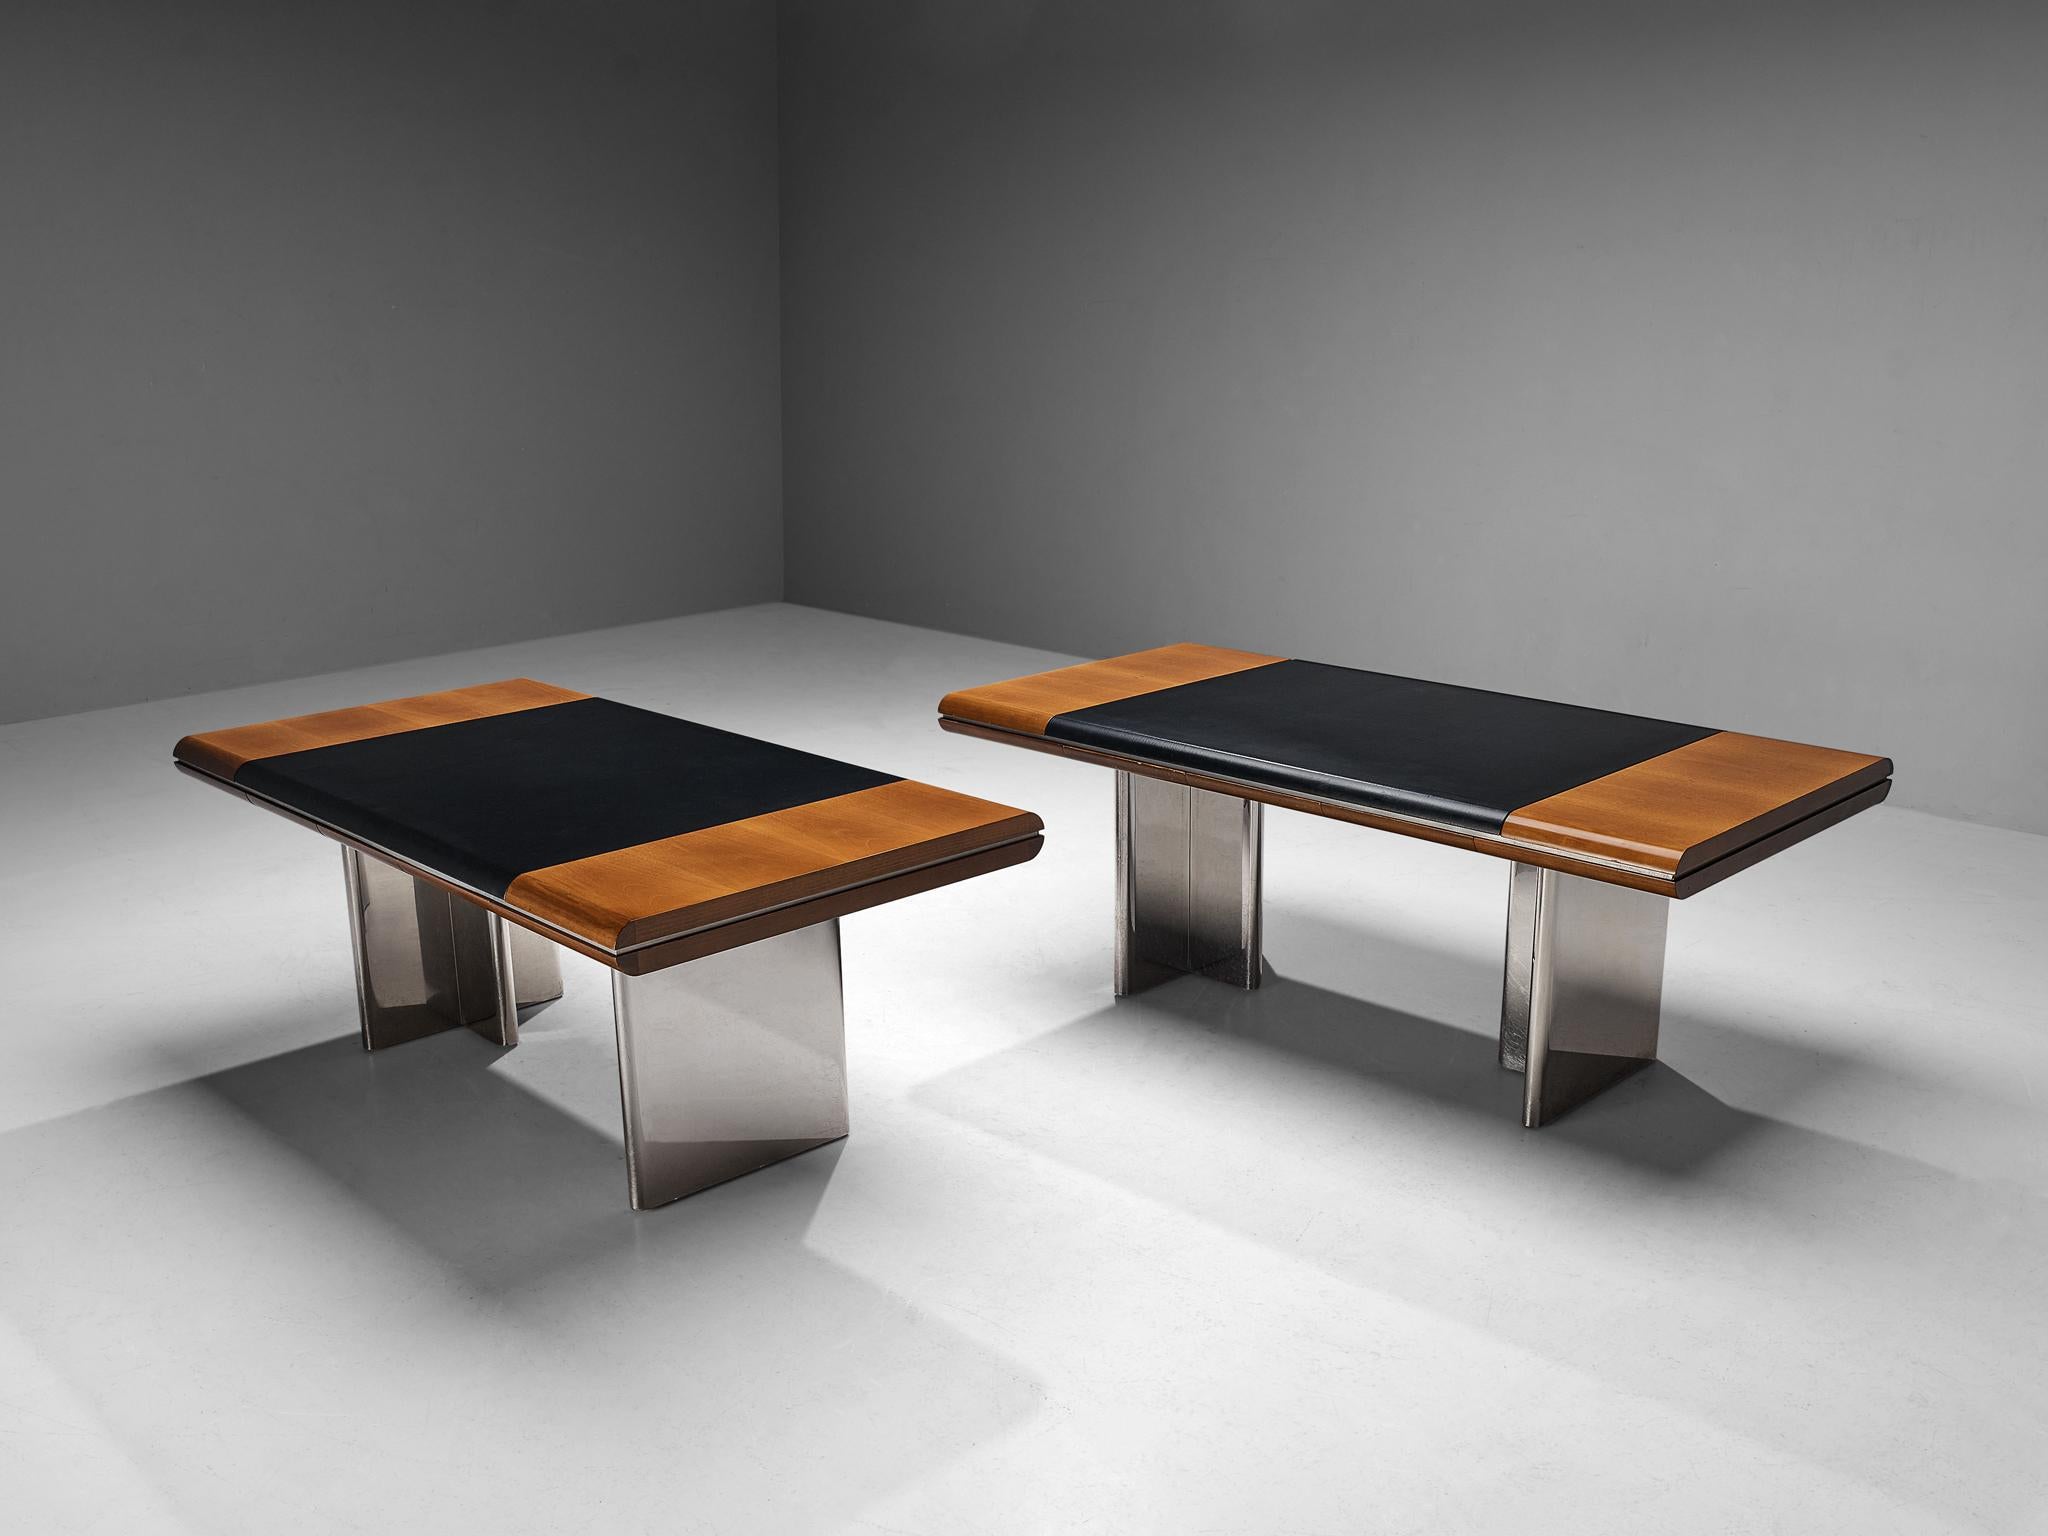 Hans Von Klier for Skipper, writing desks, mahogany, leather, steel, Italy, 1970s

Impressive office desk designed by Hans von Klier. A striking combination of differently textured materials in three colors makes this desk an intriguing piece. To